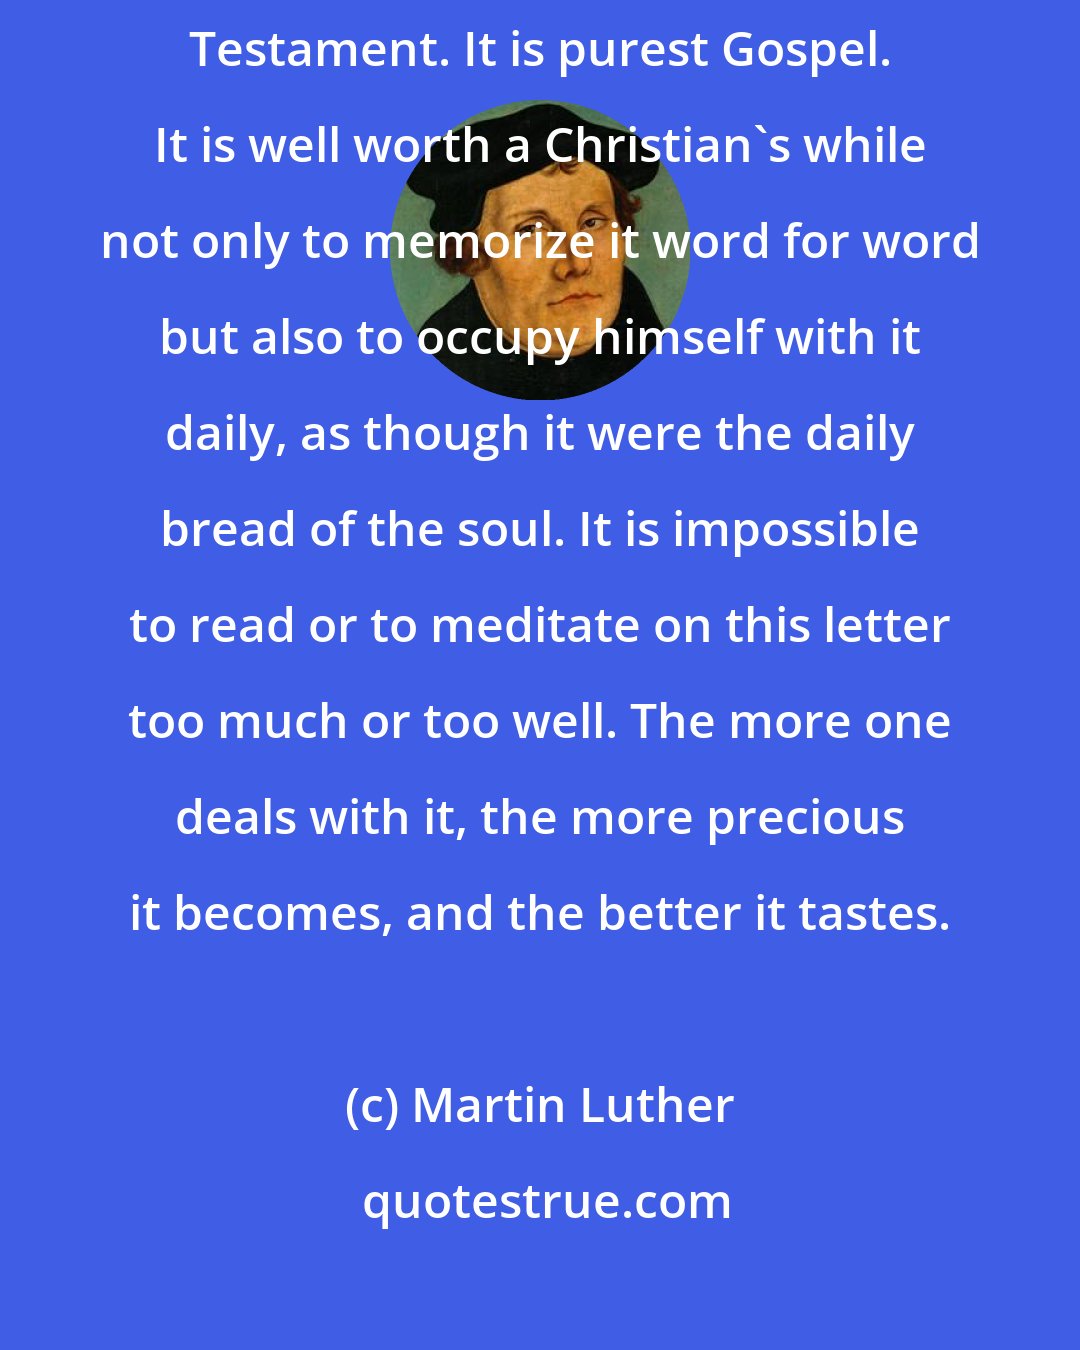 Martin Luther: This letter [to the Romans] is truly the most important piece in the New Testament. It is purest Gospel. It is well worth a Christian's while not only to memorize it word for word but also to occupy himself with it daily, as though it were the daily bread of the soul. It is impossible to read or to meditate on this letter too much or too well. The more one deals with it, the more precious it becomes, and the better it tastes.